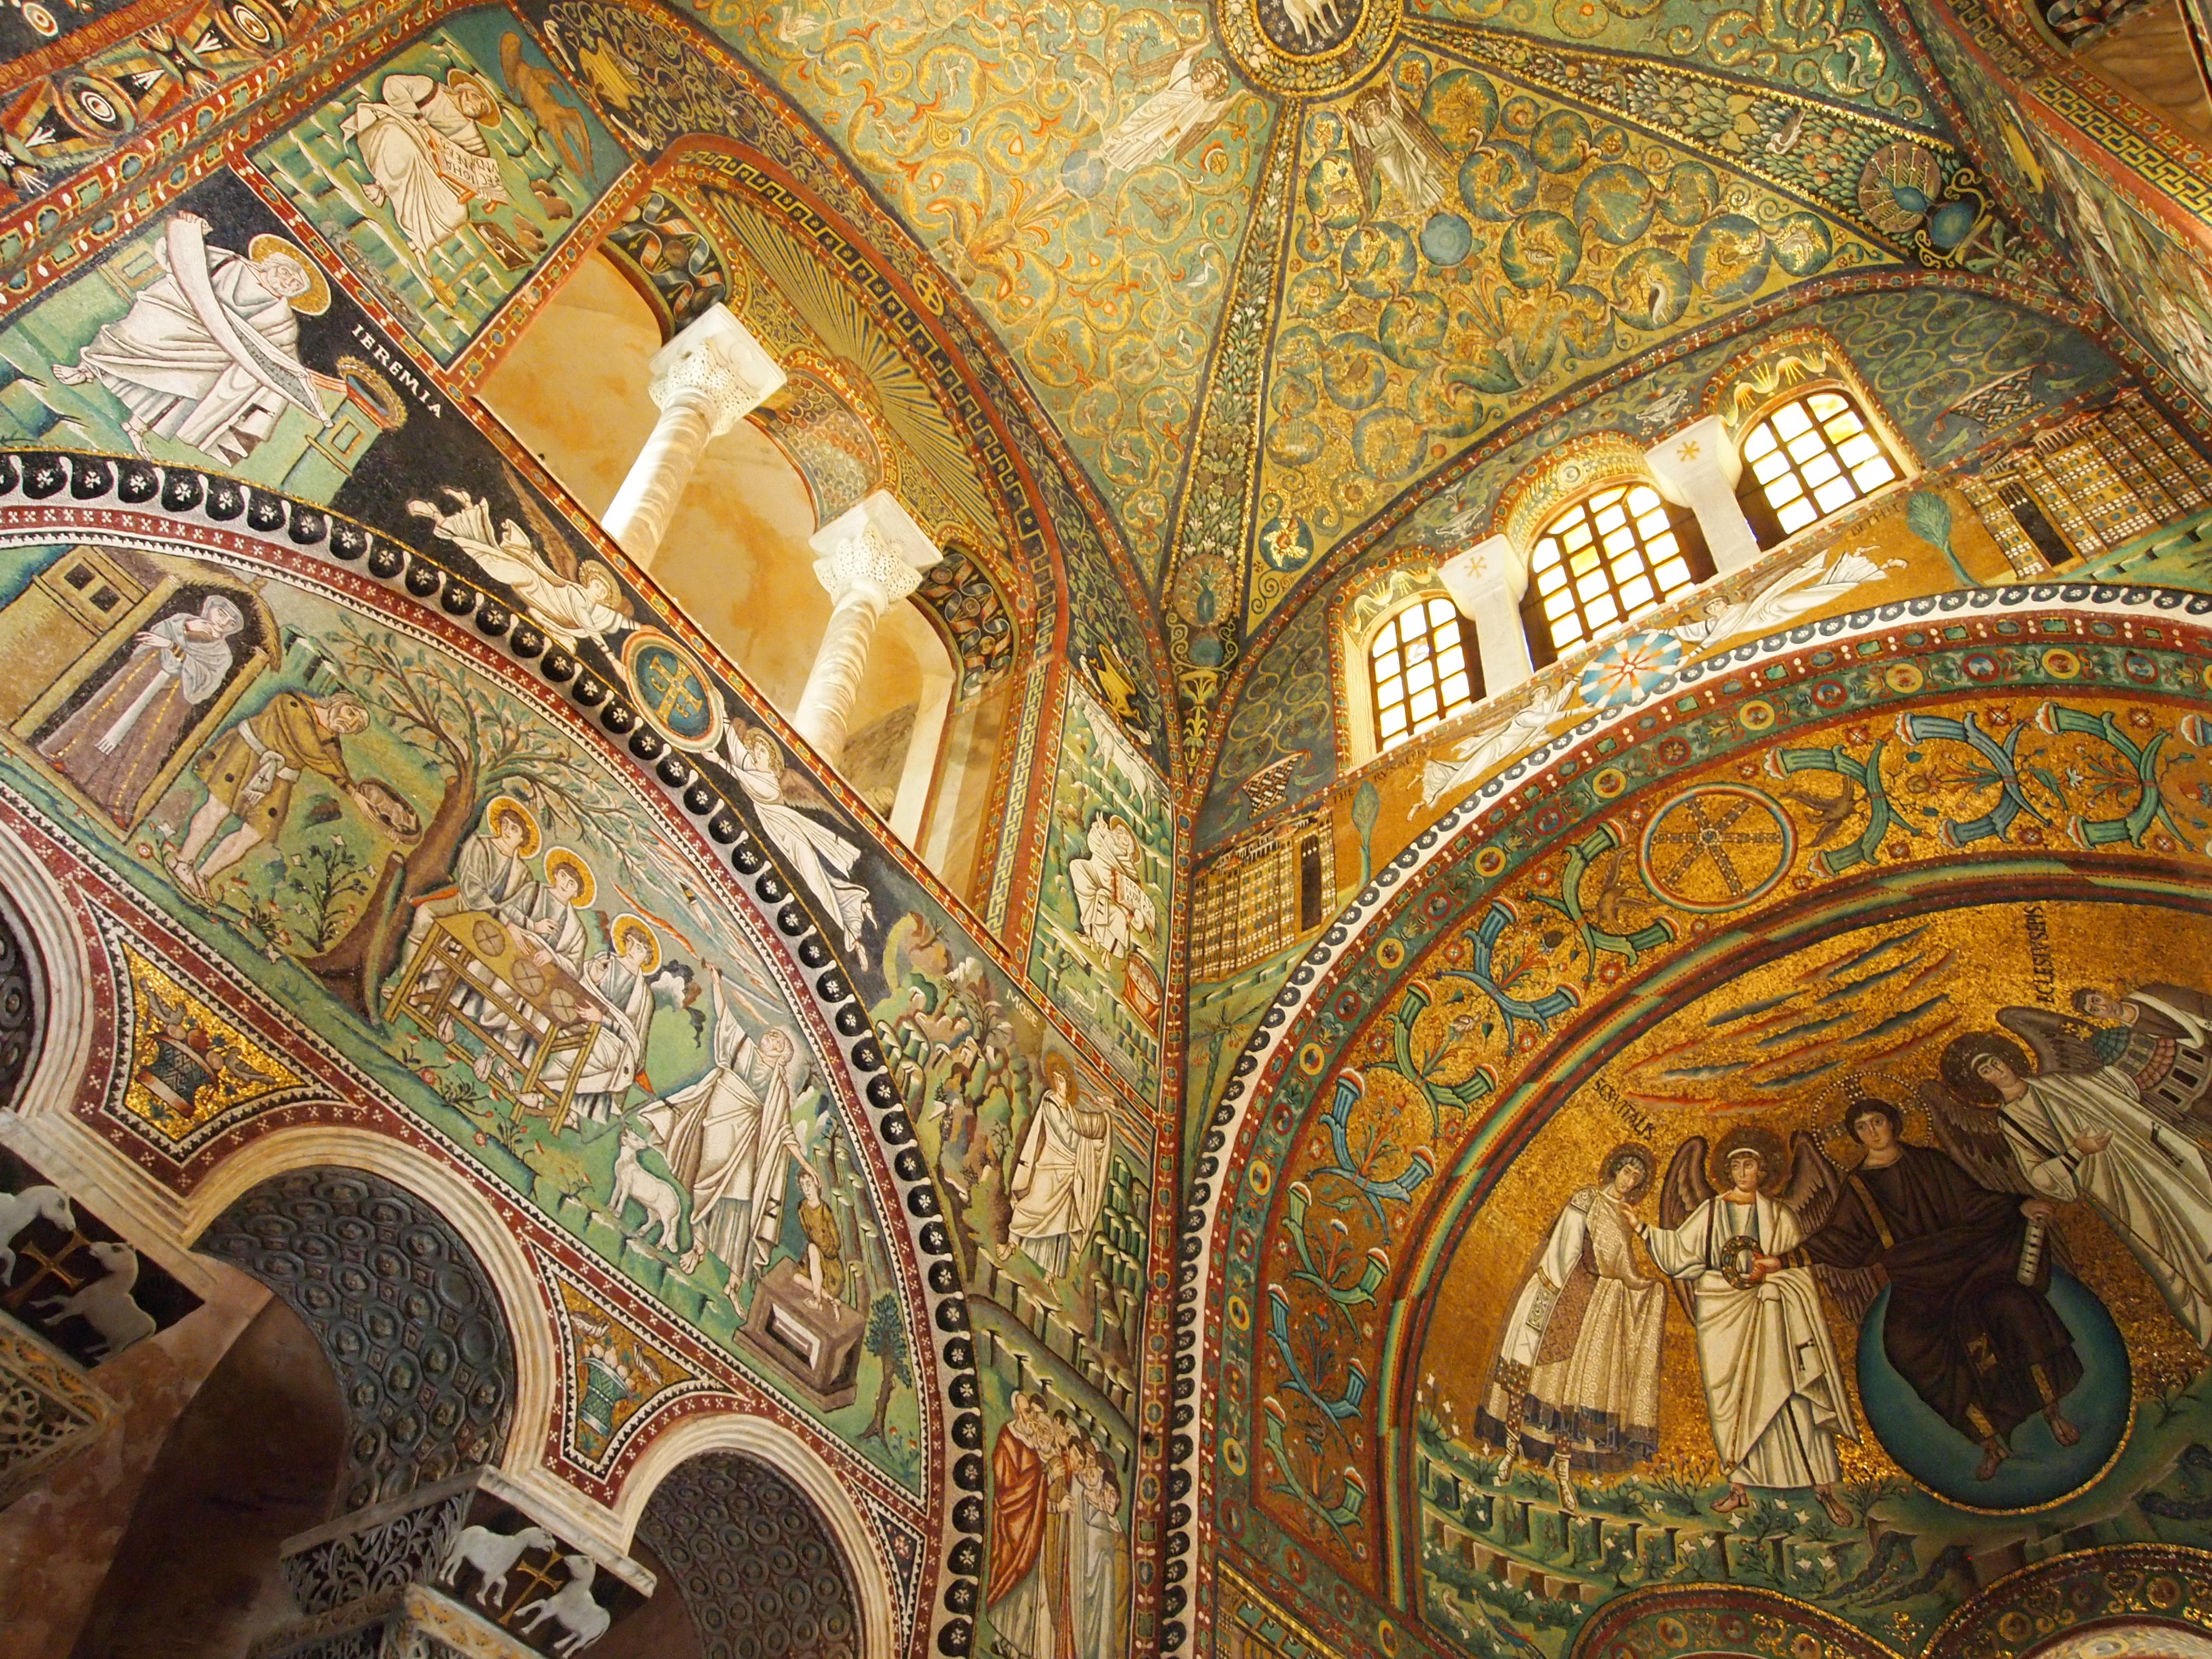 The three best places to view mosaic art in Ravenna ...
